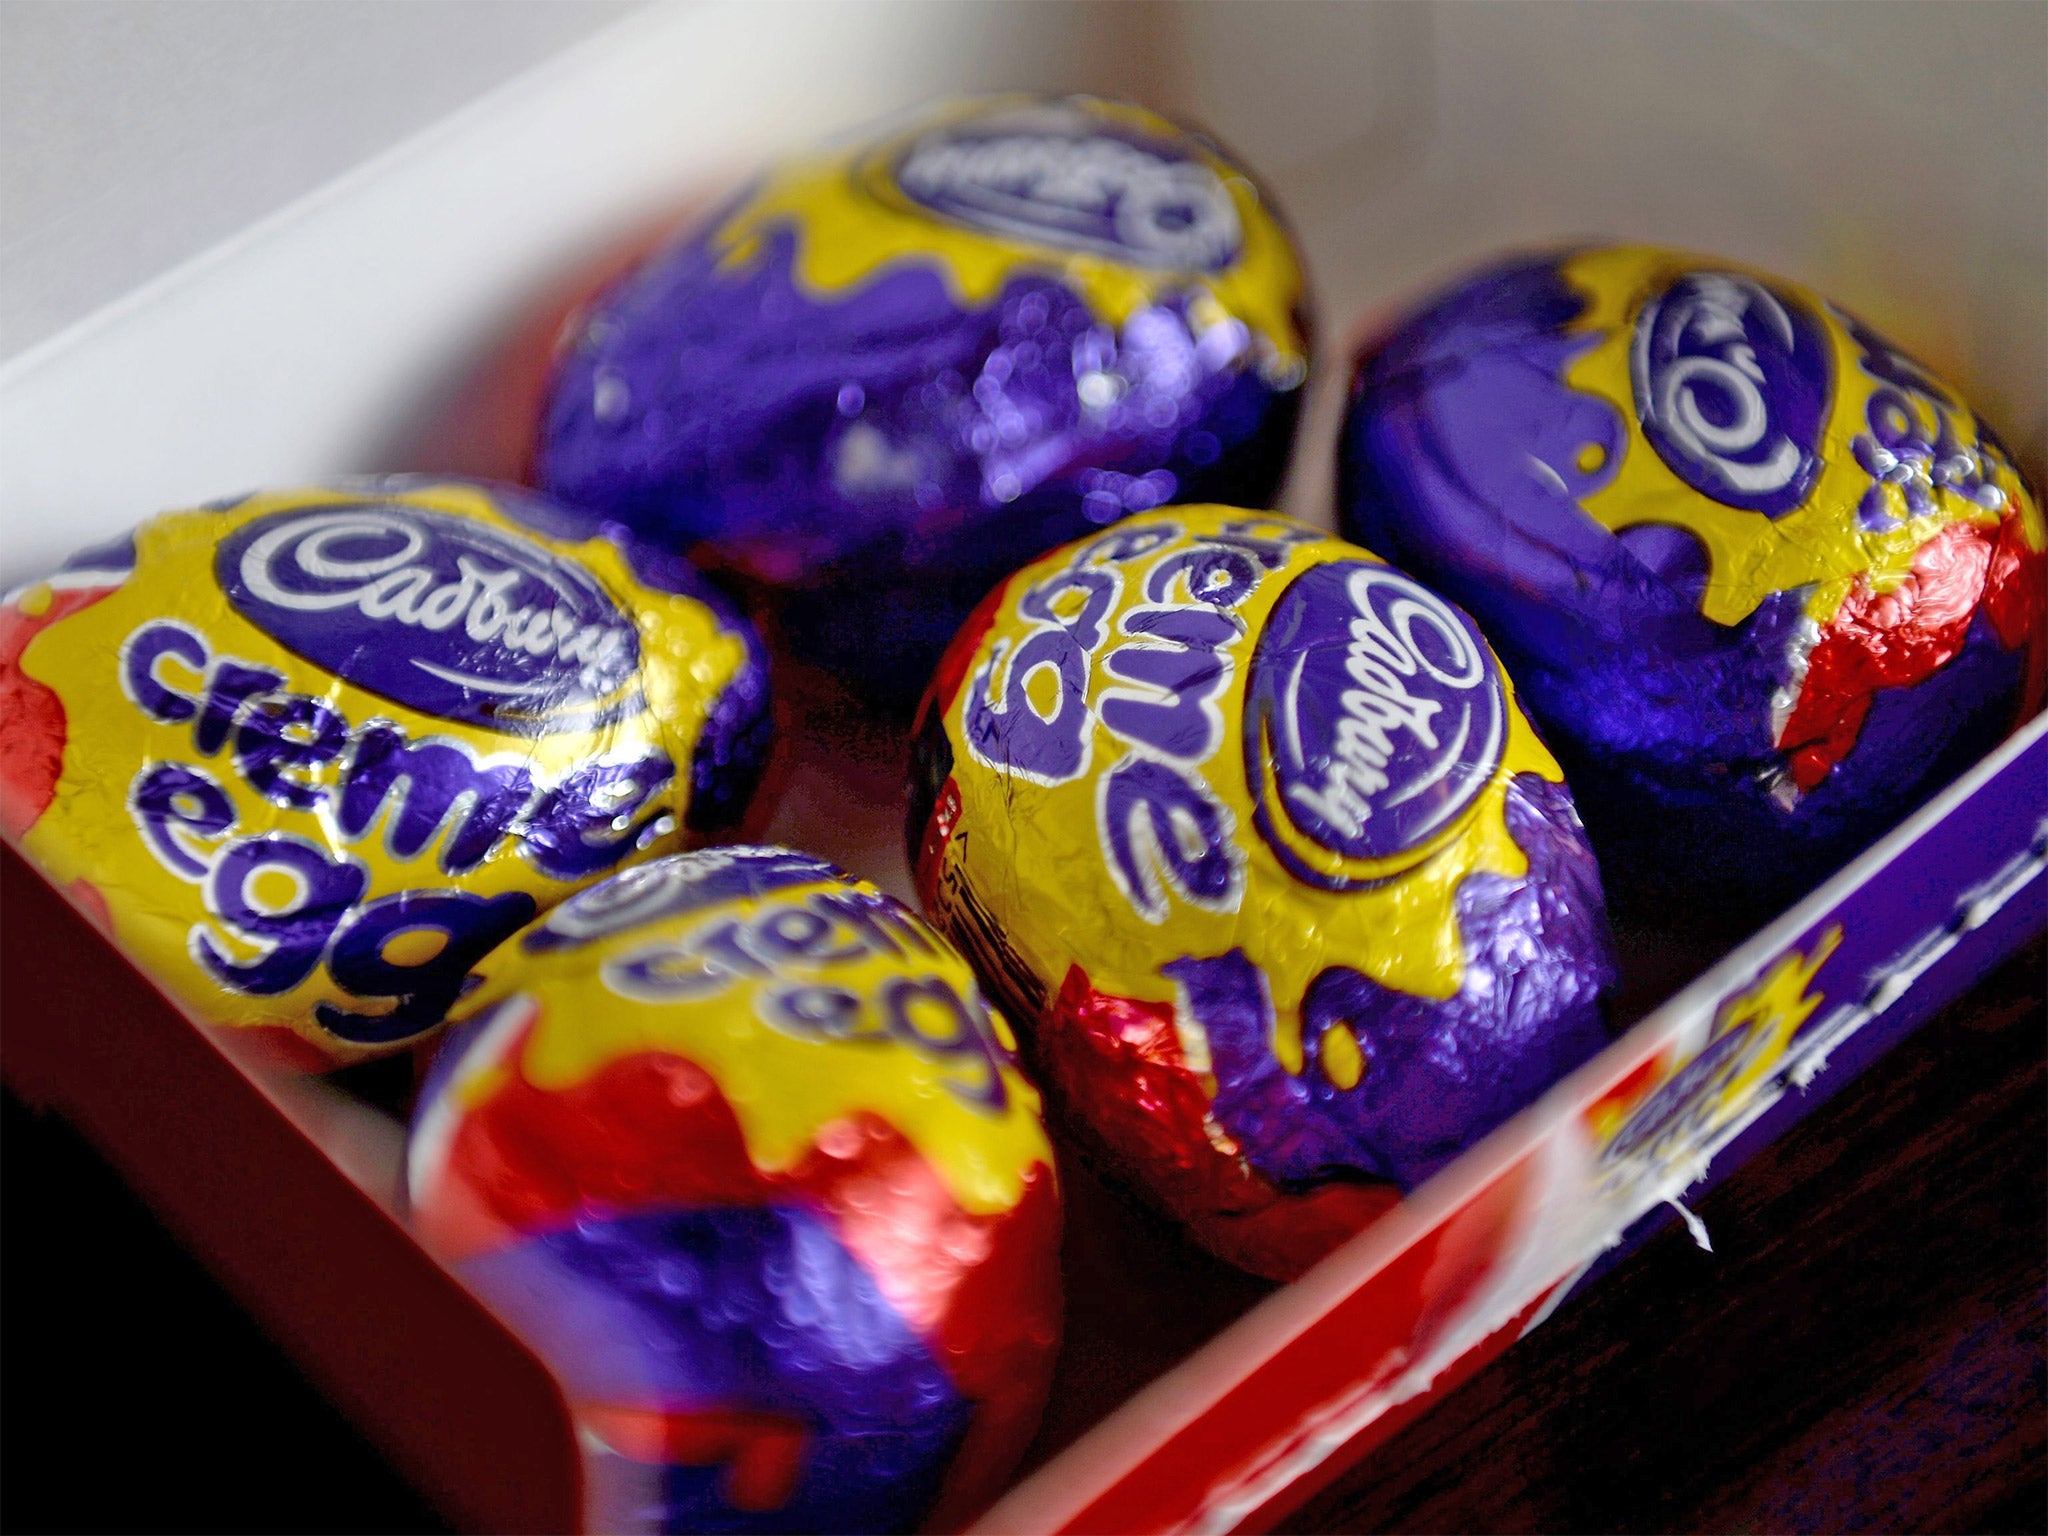 'Cadbury Creme Egg cafe' to open in London